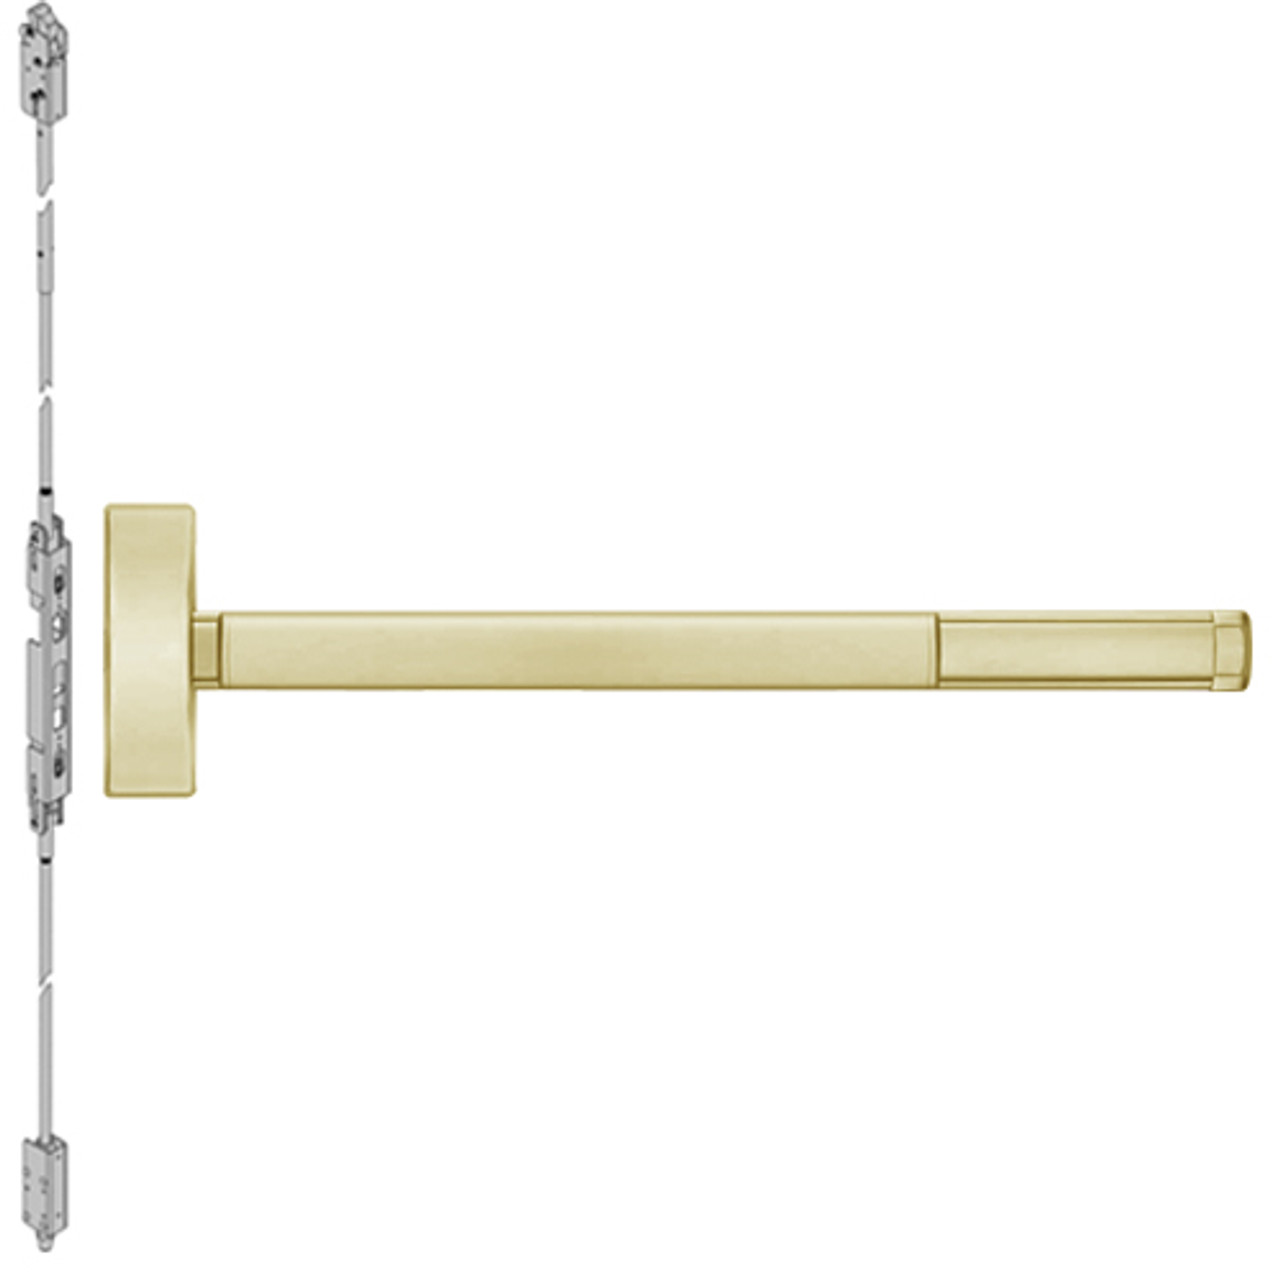 TS2801LBR-606-48 PHI 2800 Series Concealed Vertical Rod Exit Device with Touchbar Monitoring Switch Prepped for Cover Plate in Satin Brass Finish